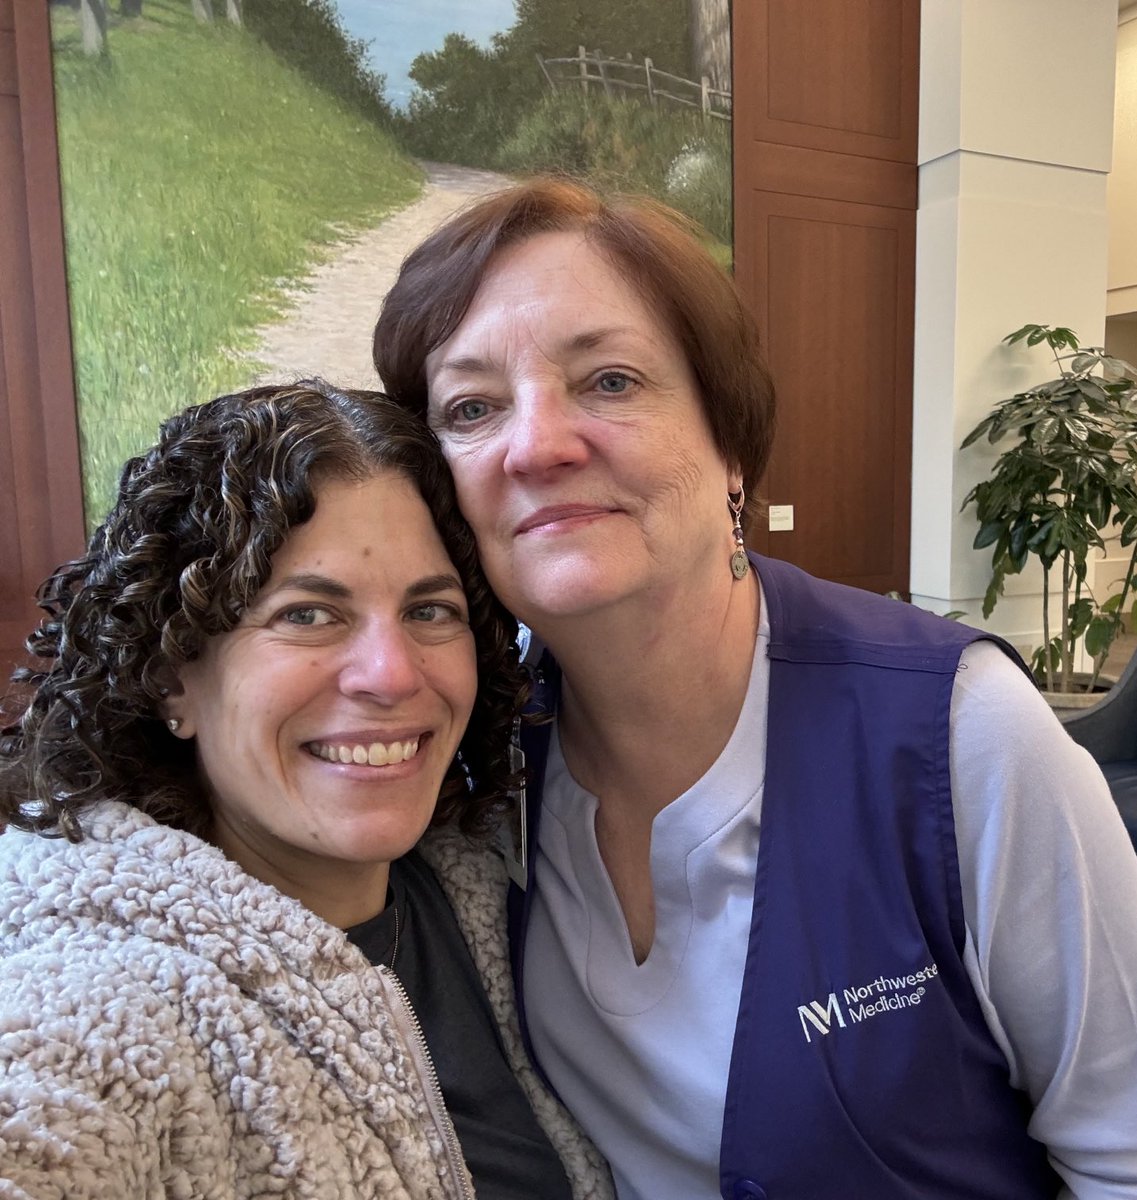 So fortunate to spend time w ⁦@BigTenMom⁩ @NorthwesternMed⁩ volunteer ⁦@NorthwesternEM⁩. What a credit to our hospital that she decided to volunteer here after the care her husband received! I learned so much. My 💜 is full. ⁦@LurieCancer Posted w permission